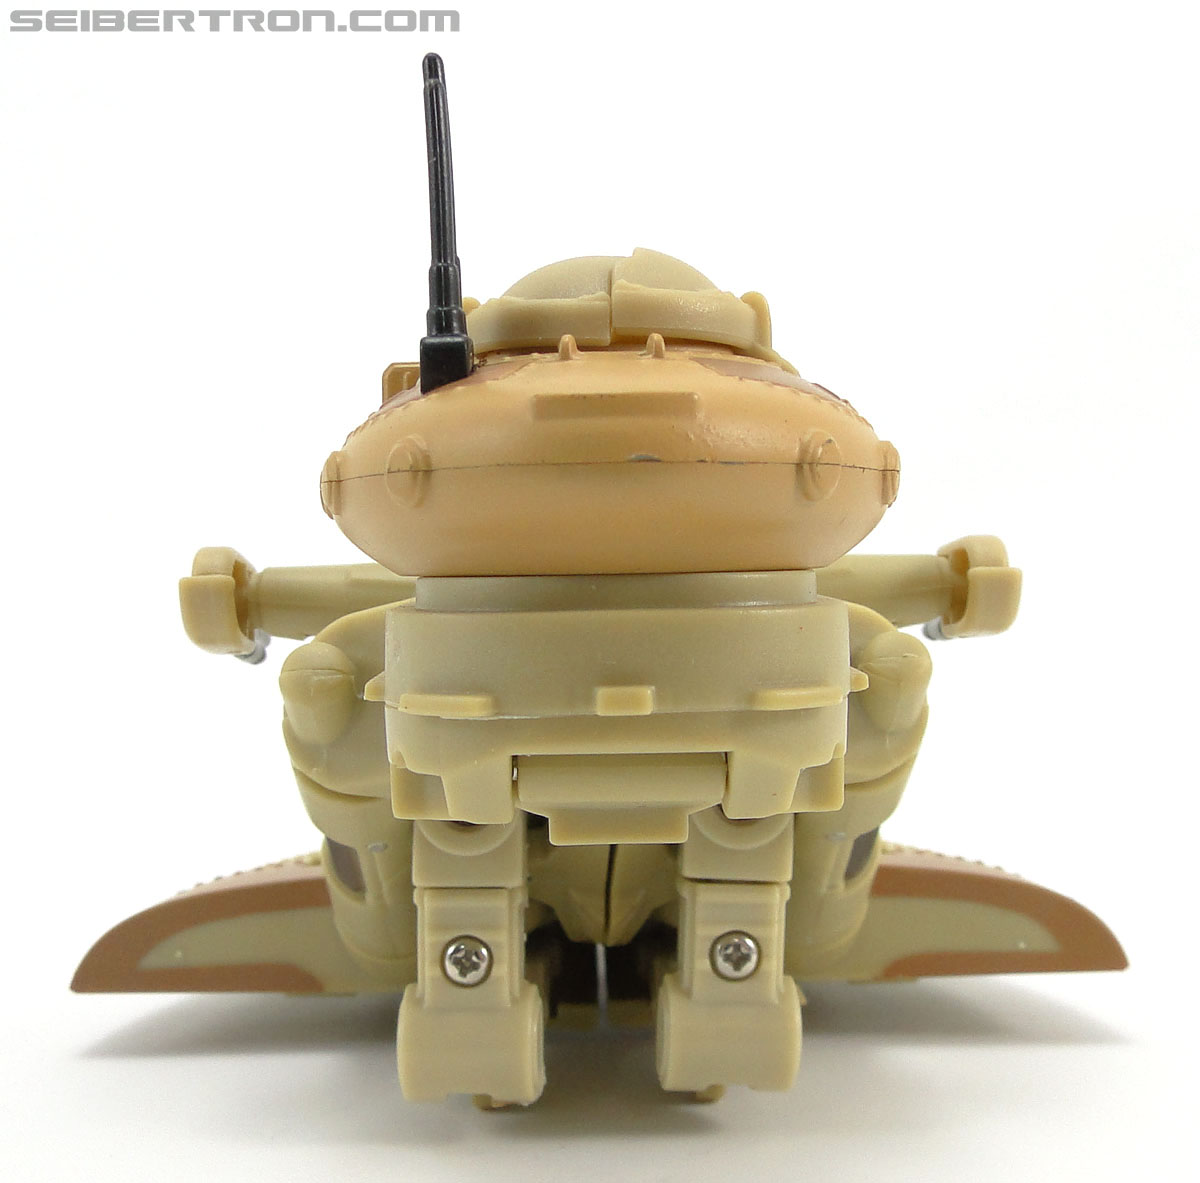 Star Wars Transformers Battle Droid Commader (Armored Assault Tank) (Battle Droid Commader) (Image #20 of 85)